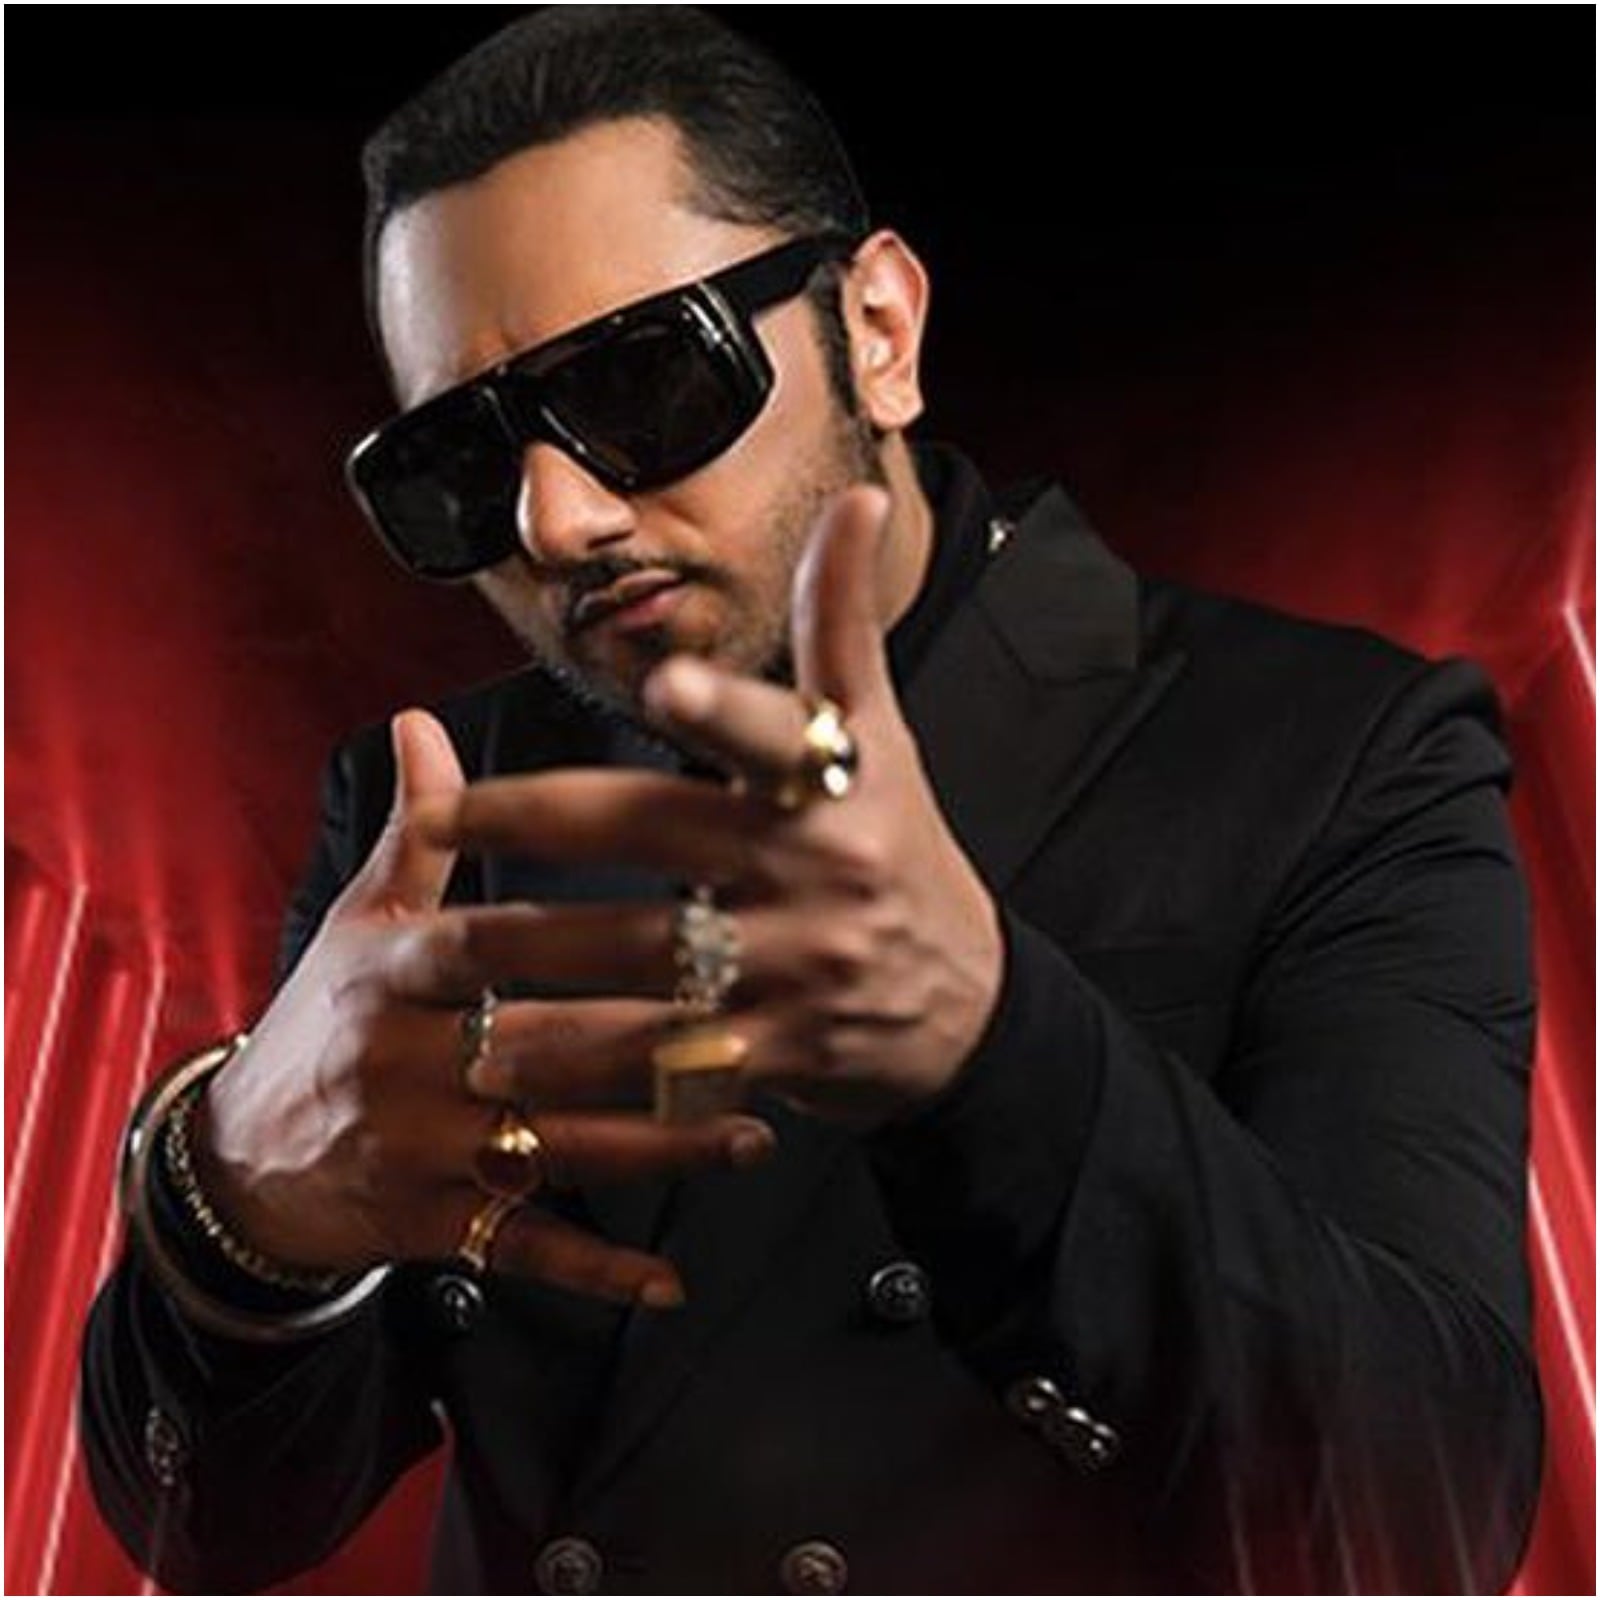 Have Gone Through a Lot': Honey Singh on Struggle With Bipolar Disorder